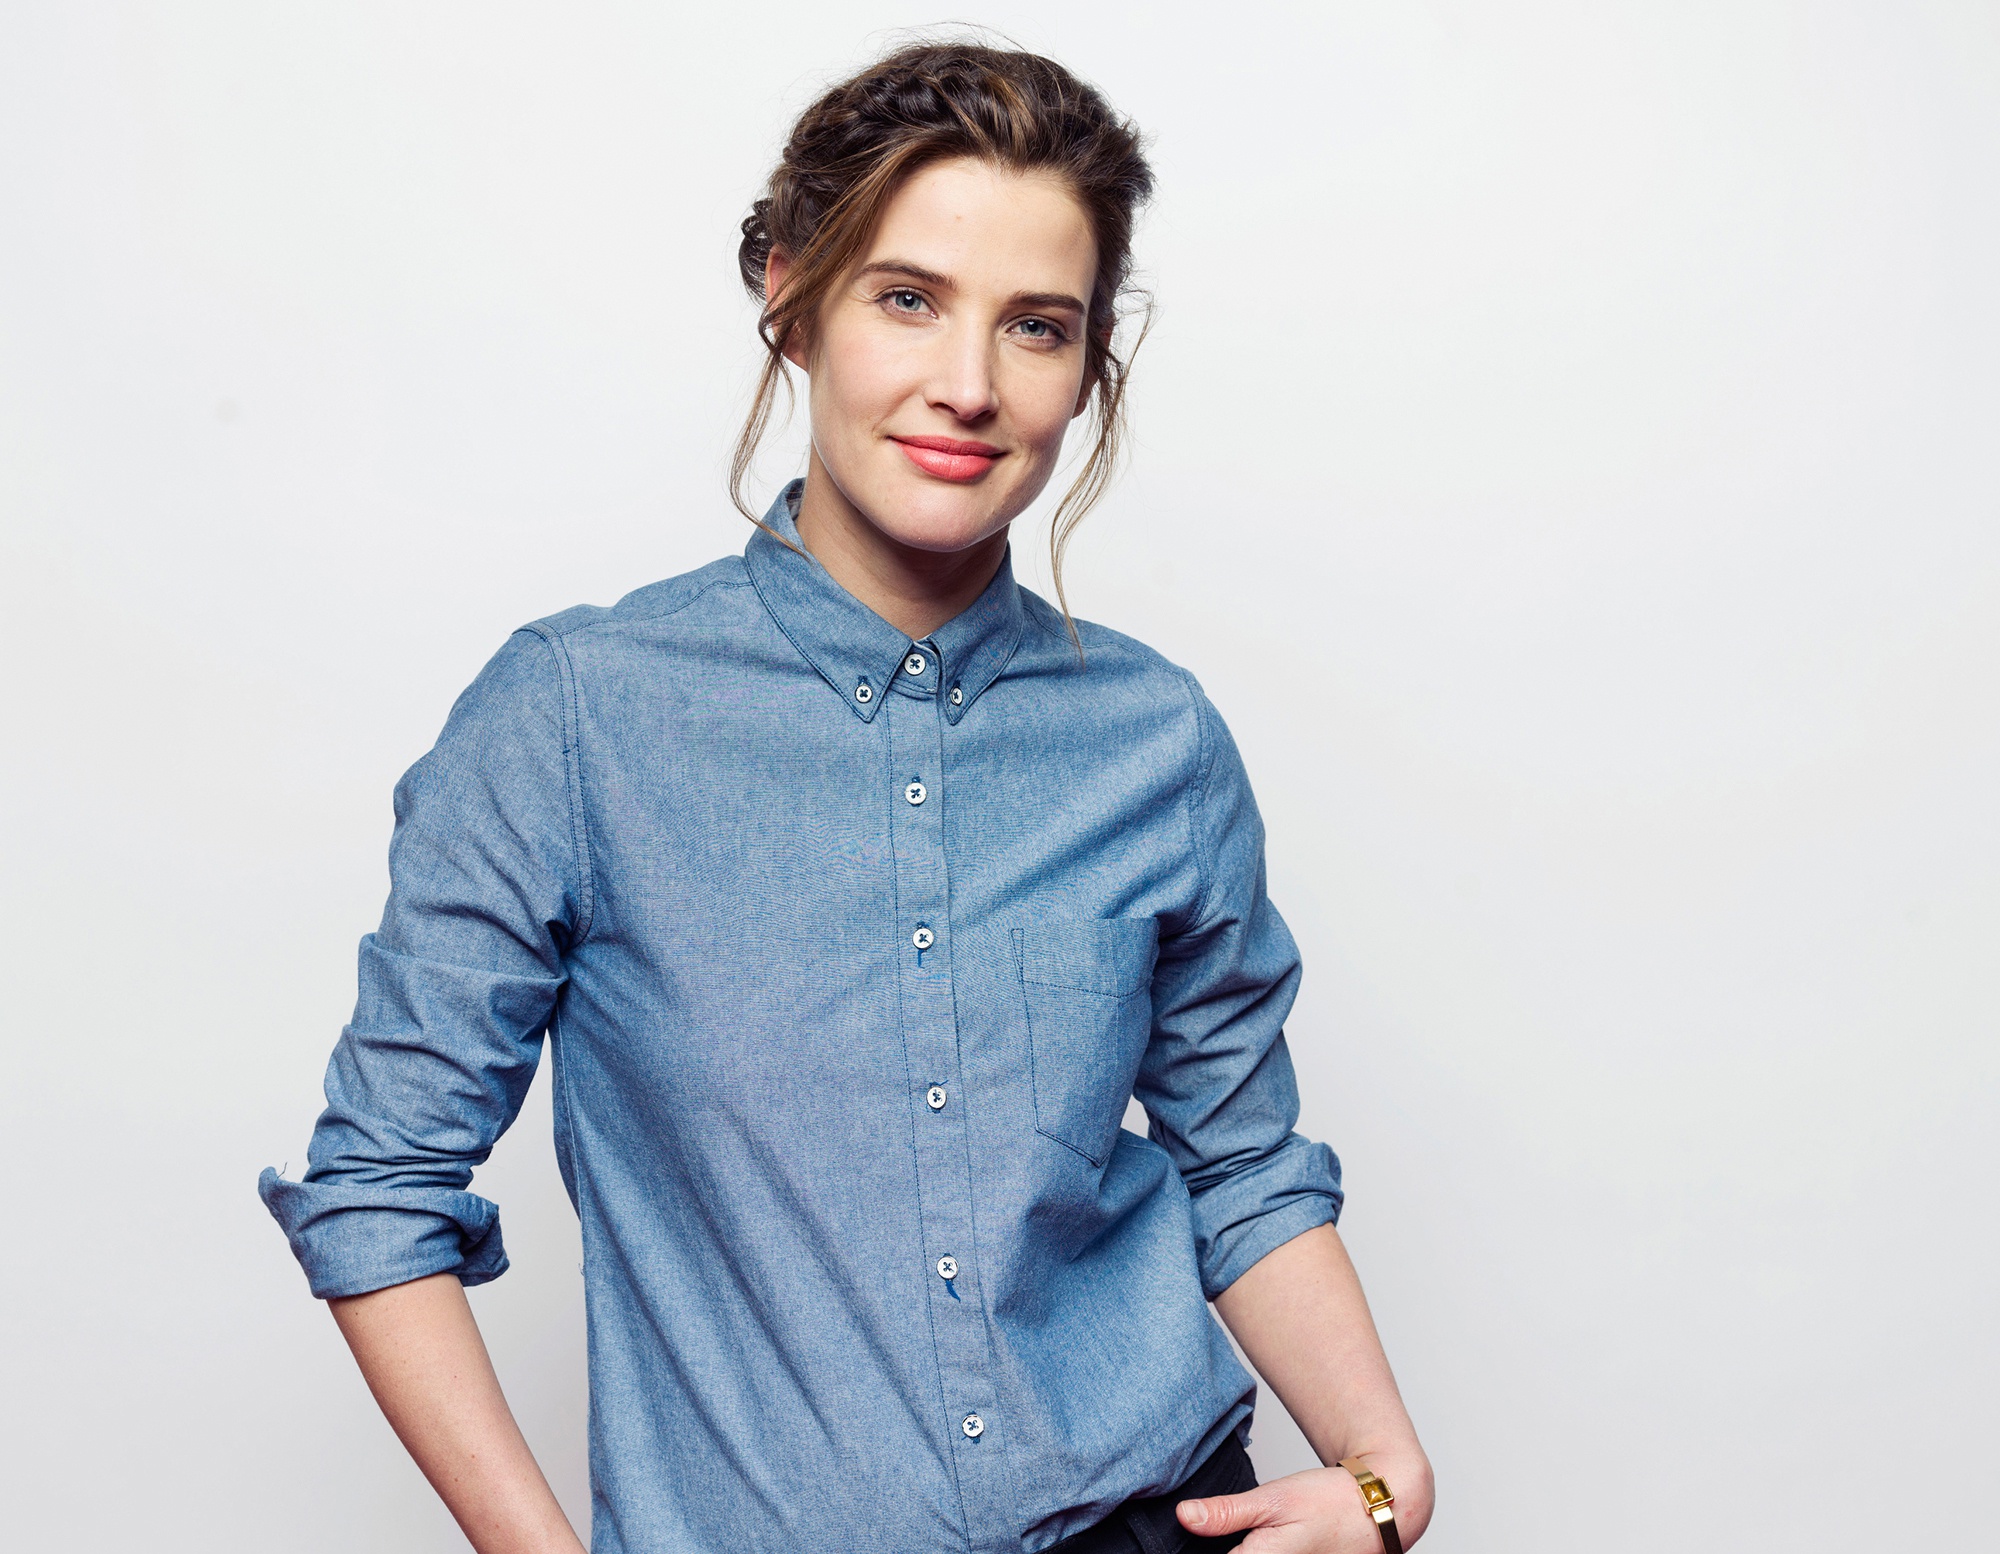 celebrity, cobie smulders, actress, blue eyes, brunette, canadian, smile cell phone wallpapers